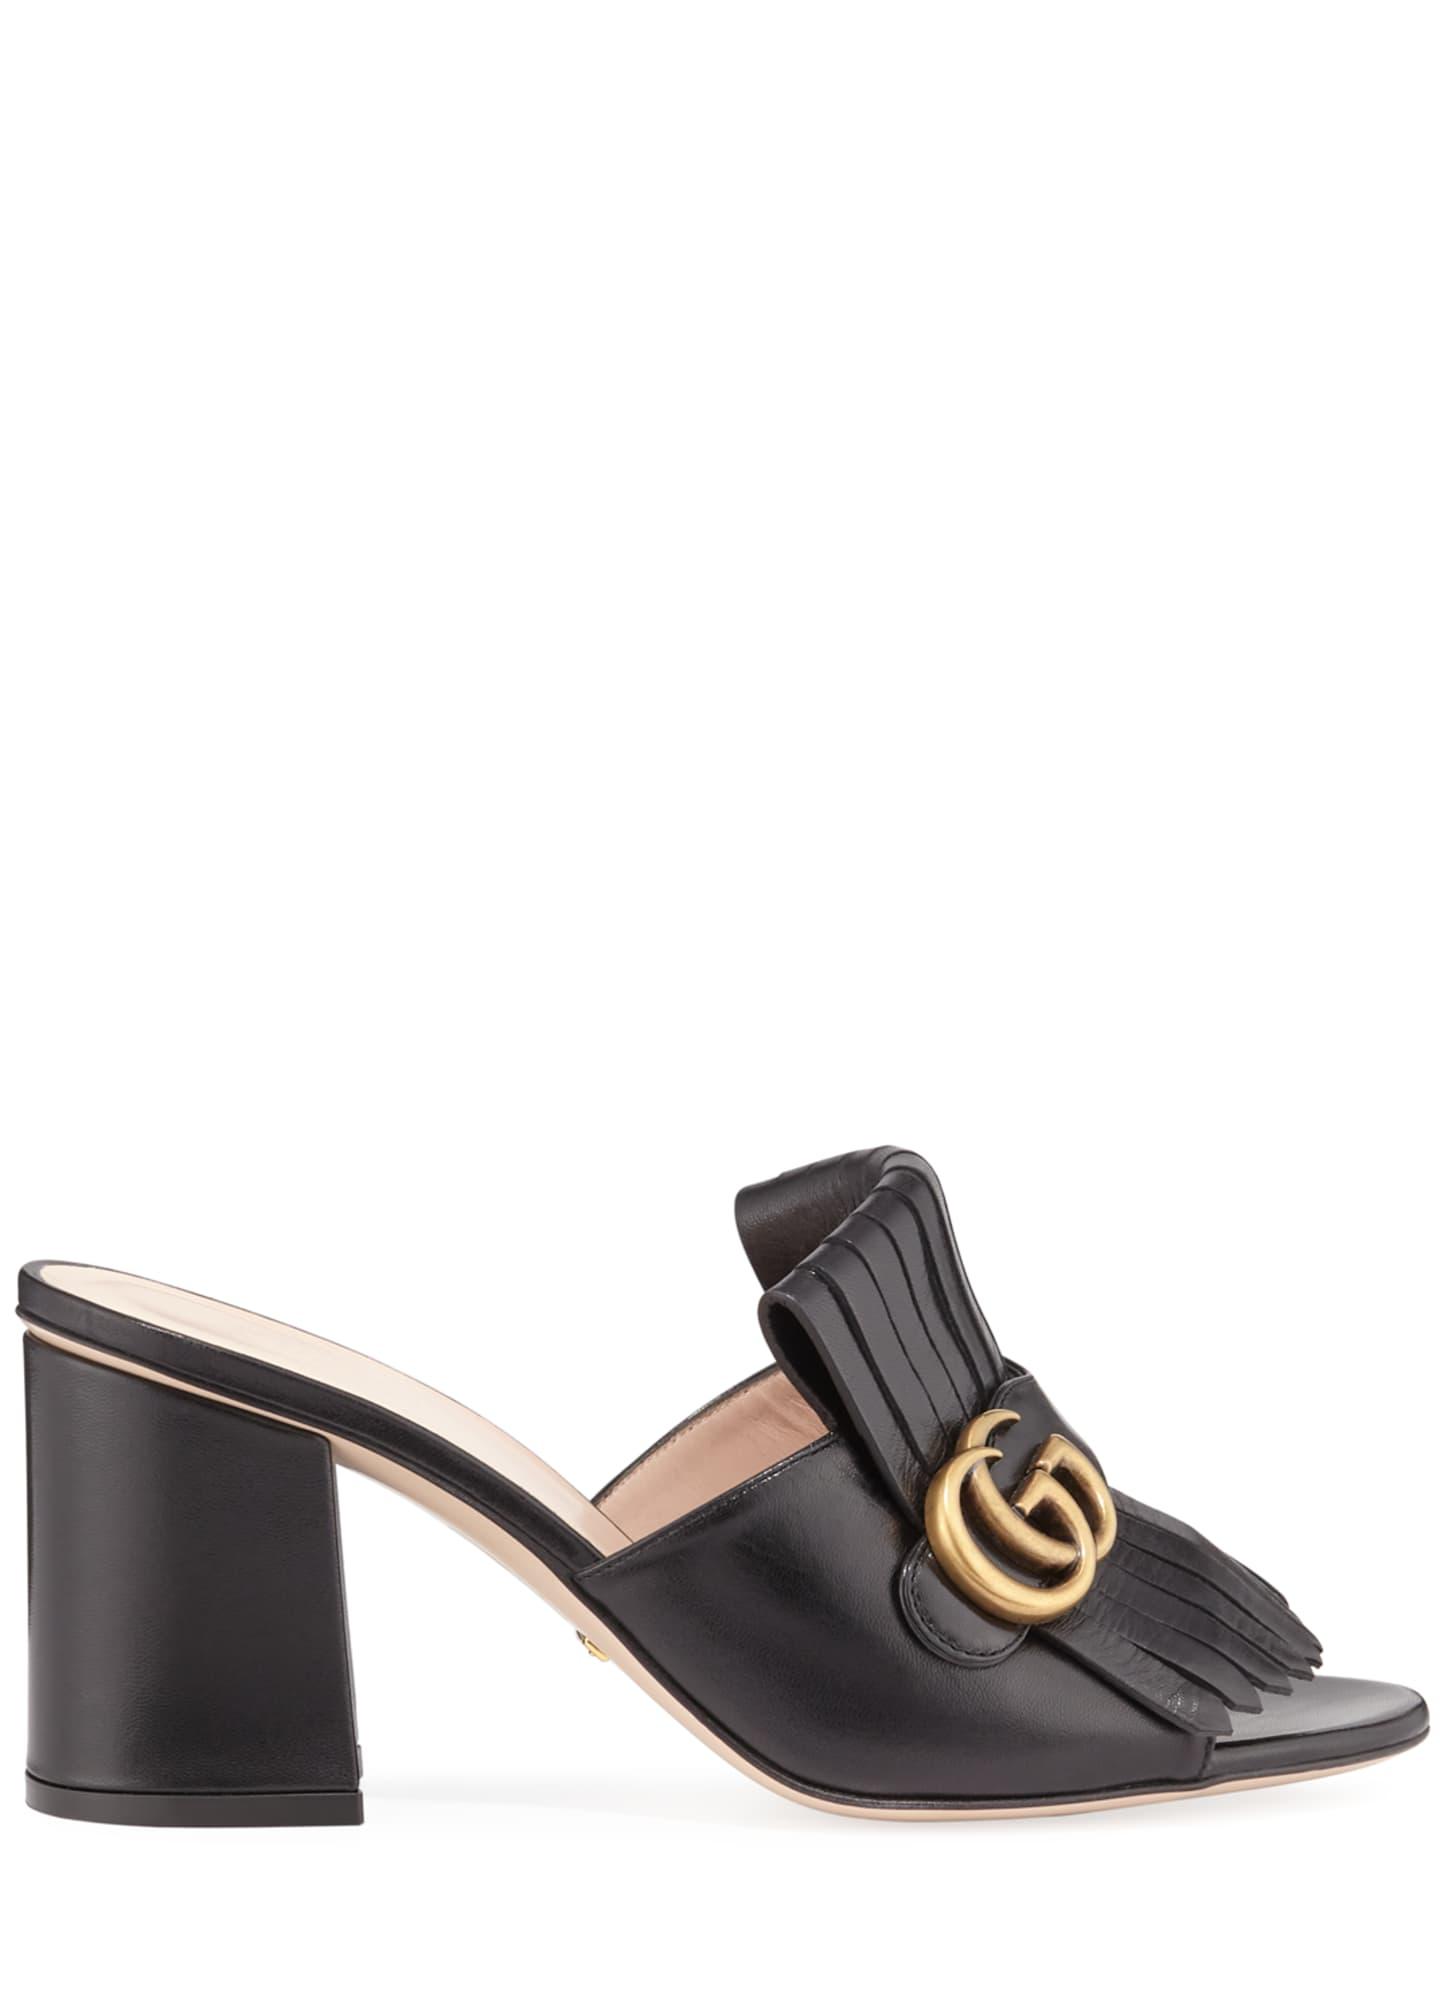 Gucci Marmont Leather Sandals in Black - Lyst